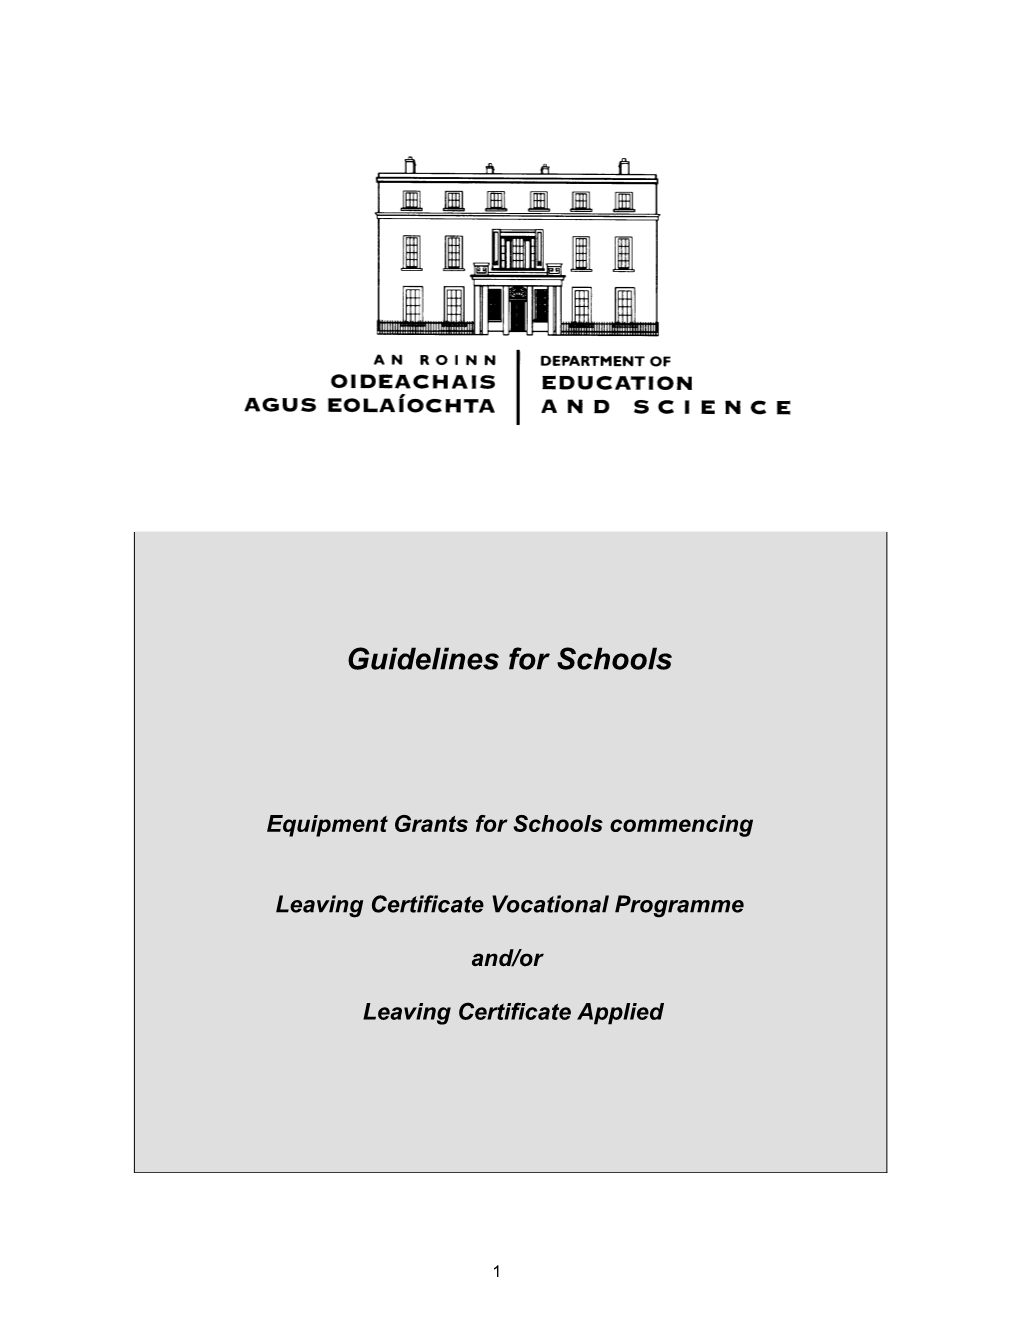 LCVP/LCA Equipment Grants - Guidelines for Schools (File Format Word 93KB)